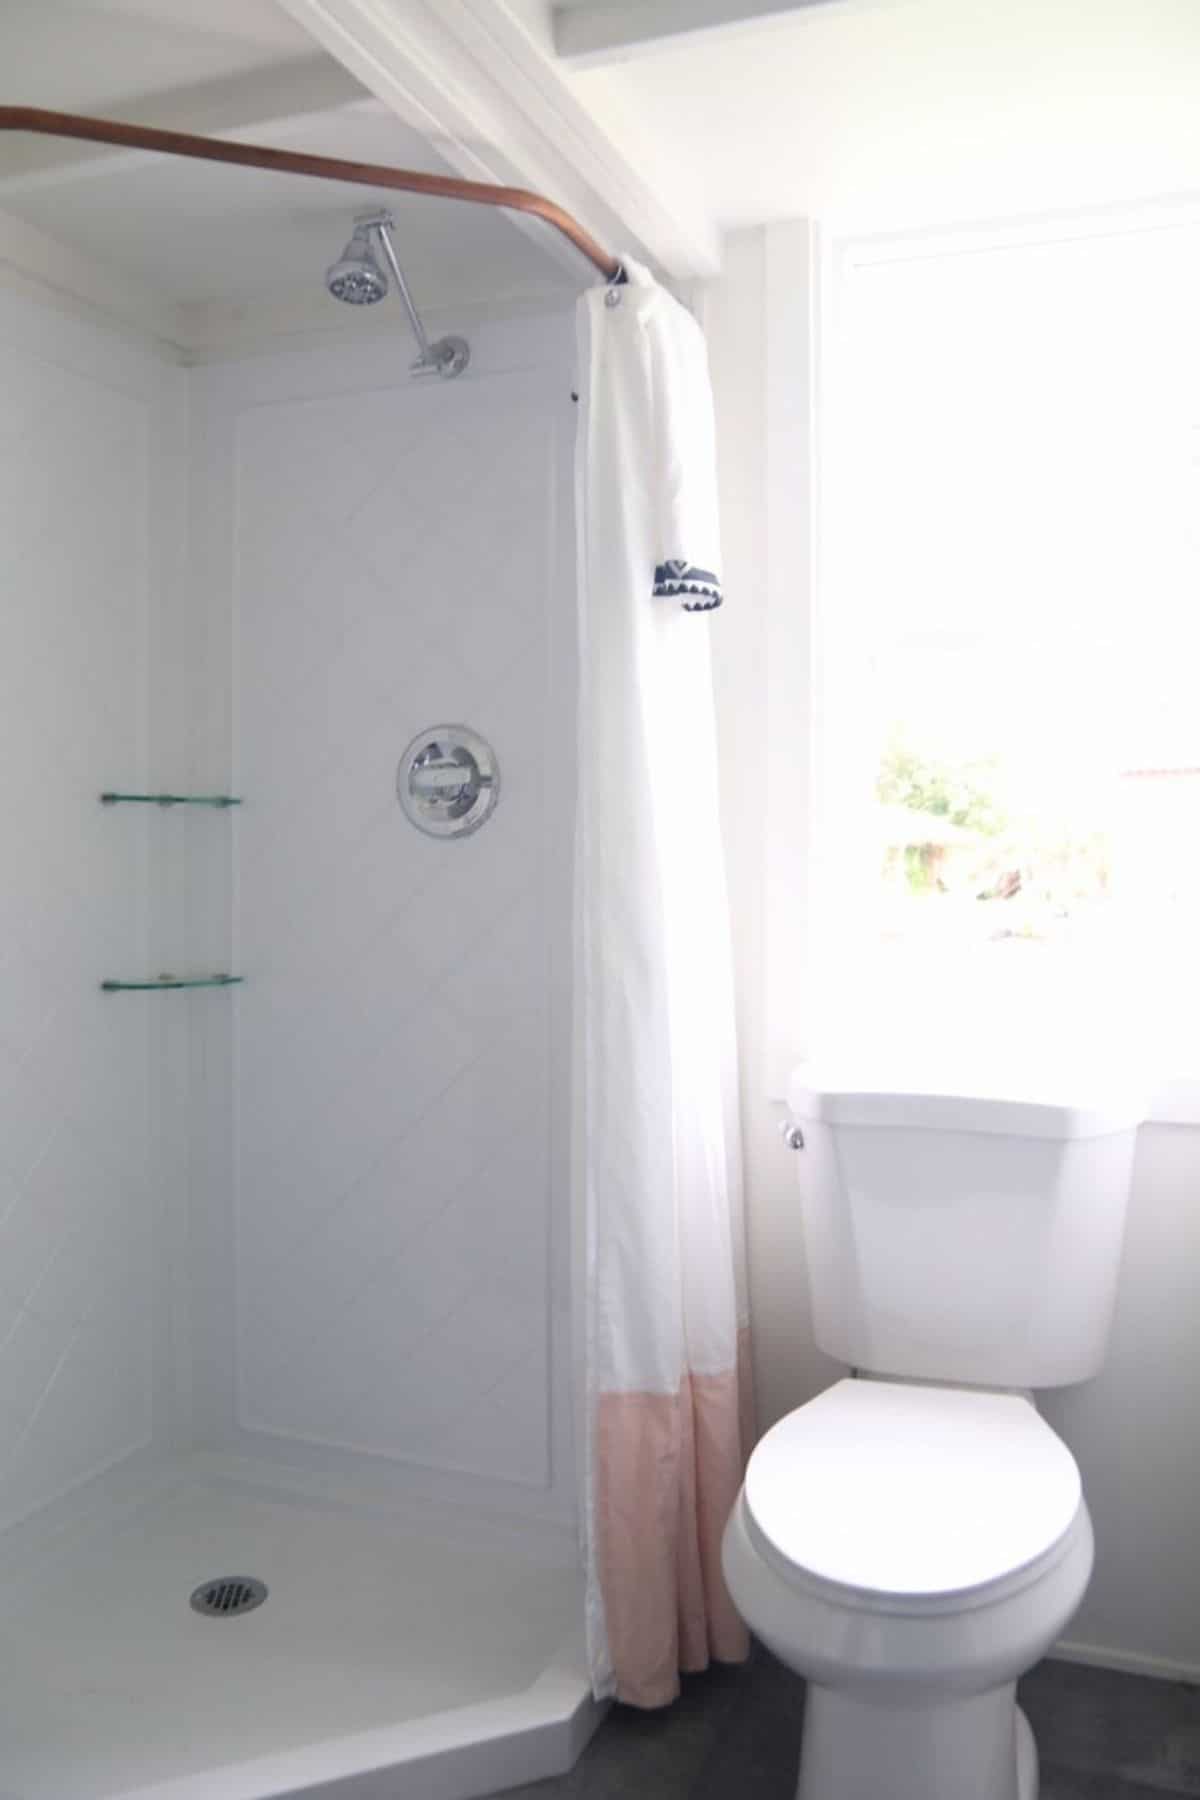 Shower stall with built in shelf in bathroom by white toilet